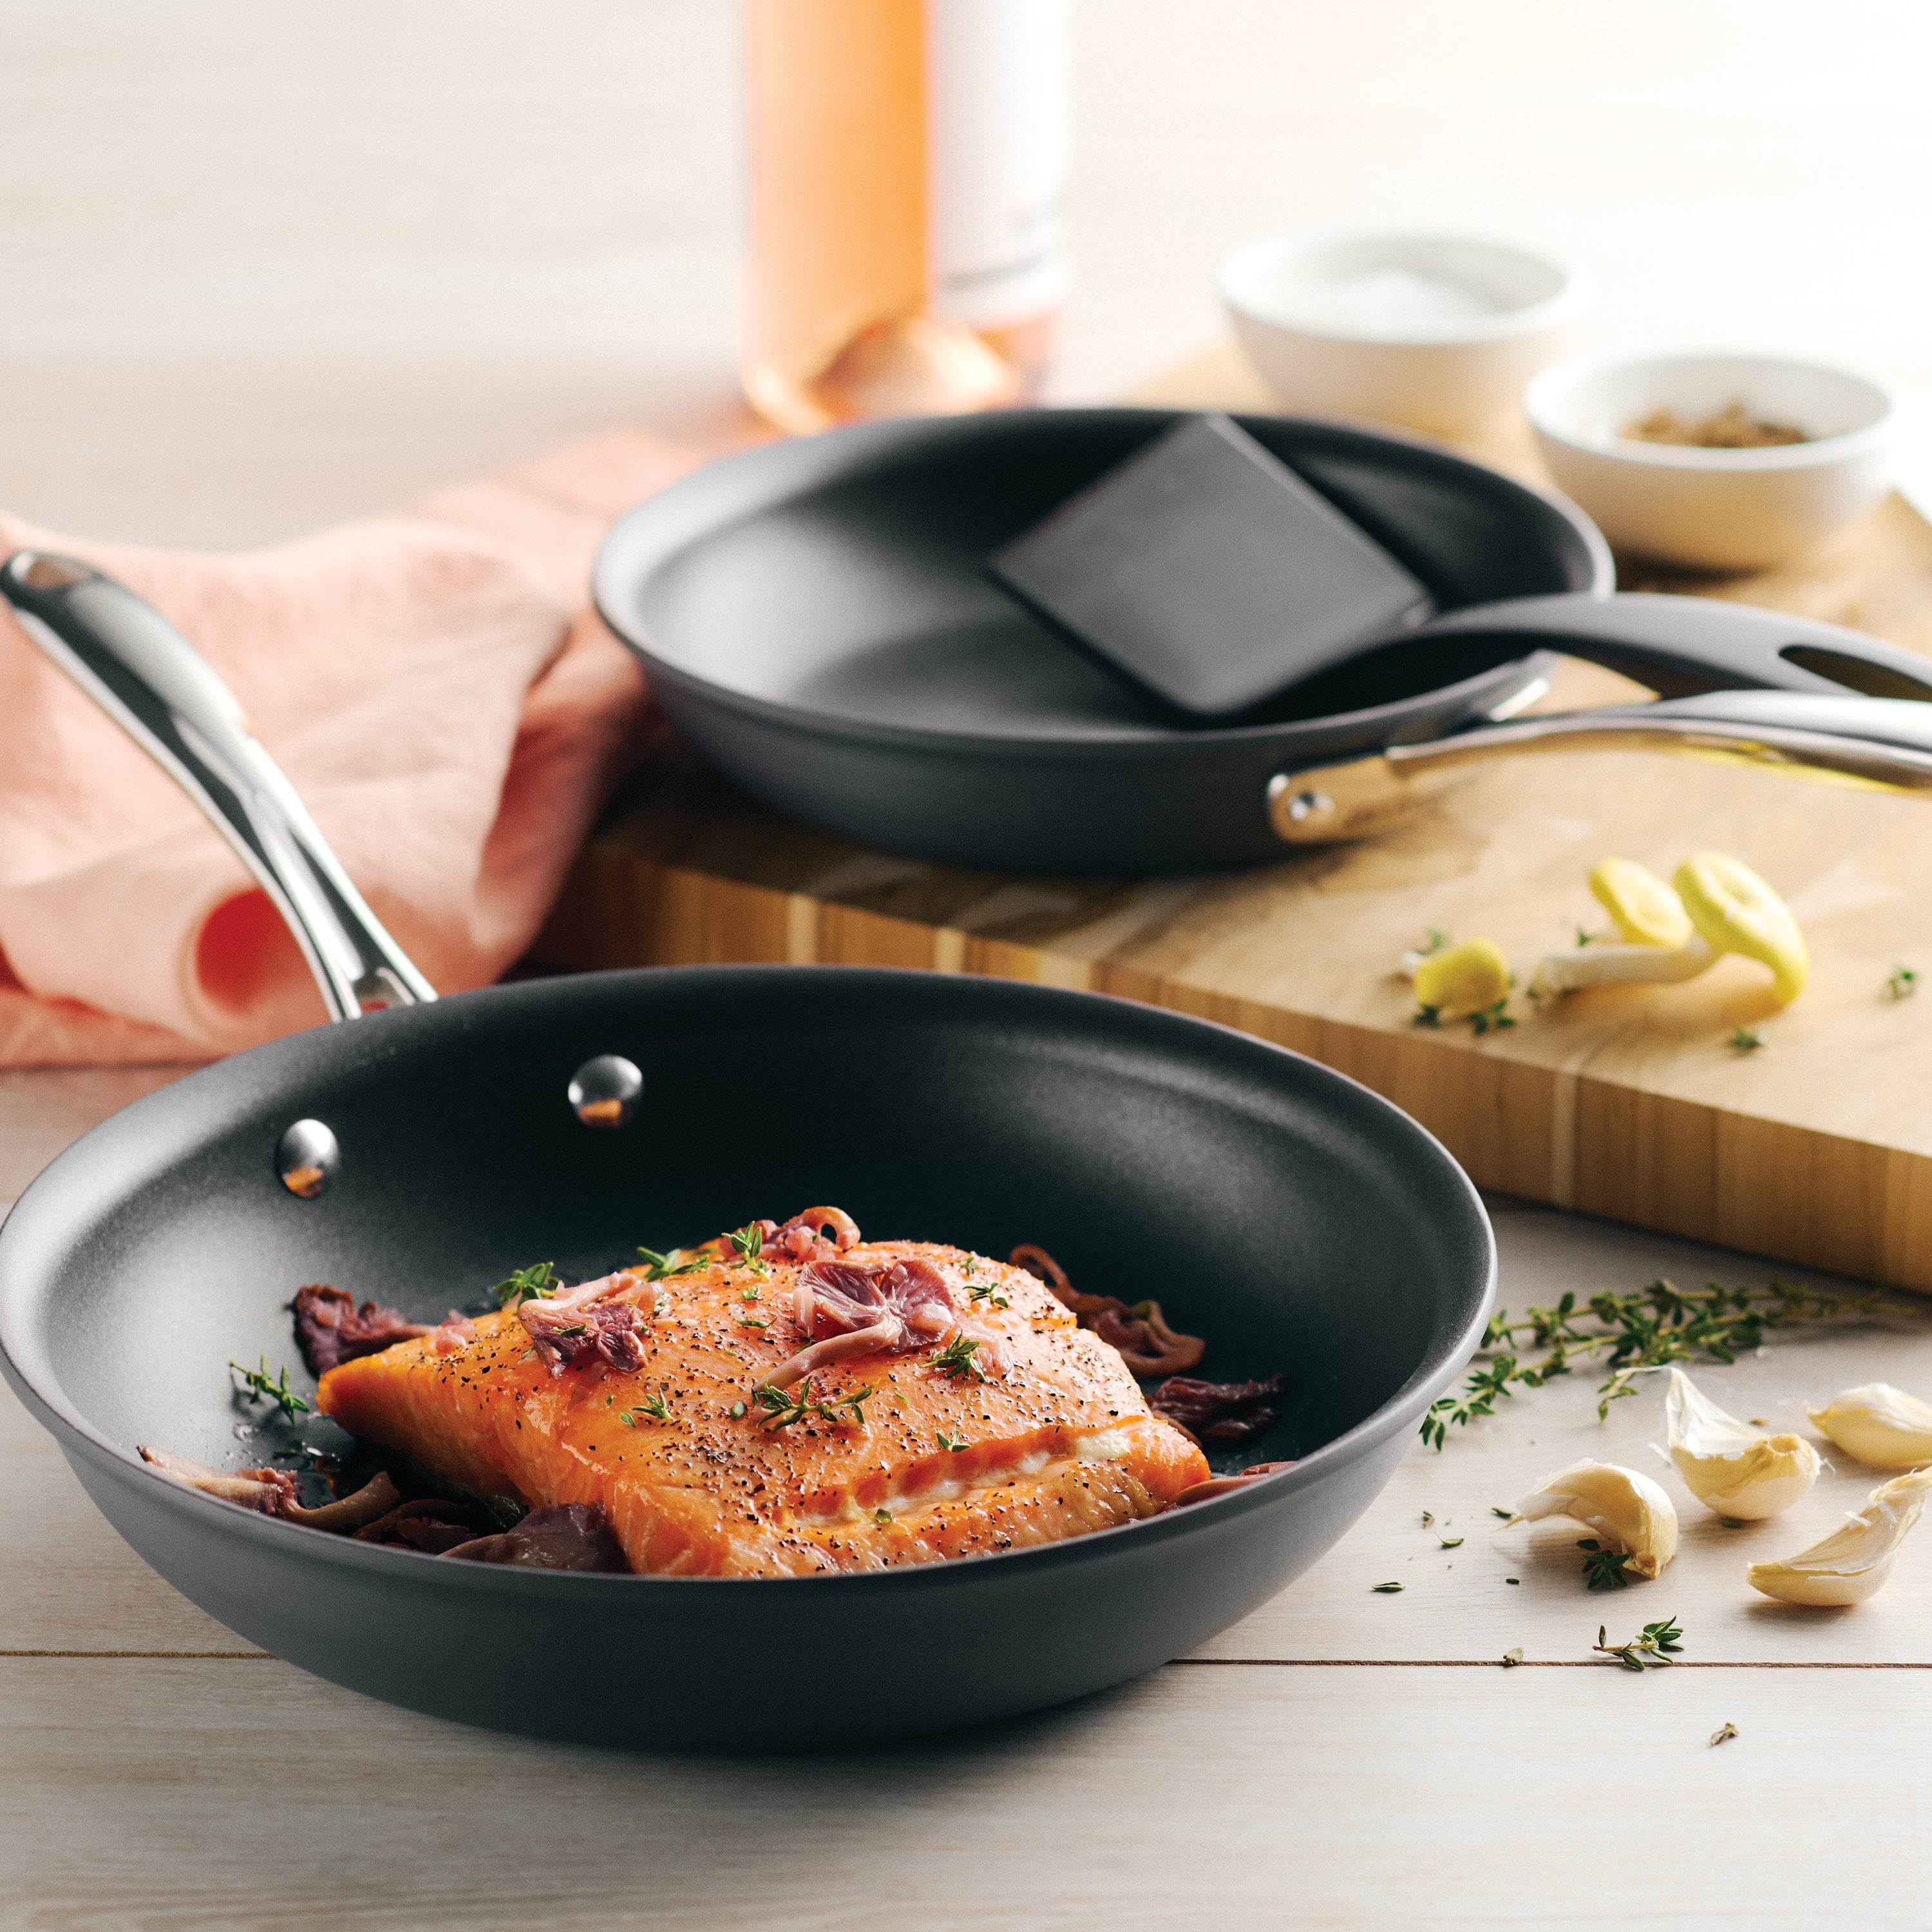  8 (20cm) 18/10 Tramontina Stainless Steel Saute / Frying Sauce Skillet  Fry Pan: Tramontina Tri Ply: Home & Kitchen